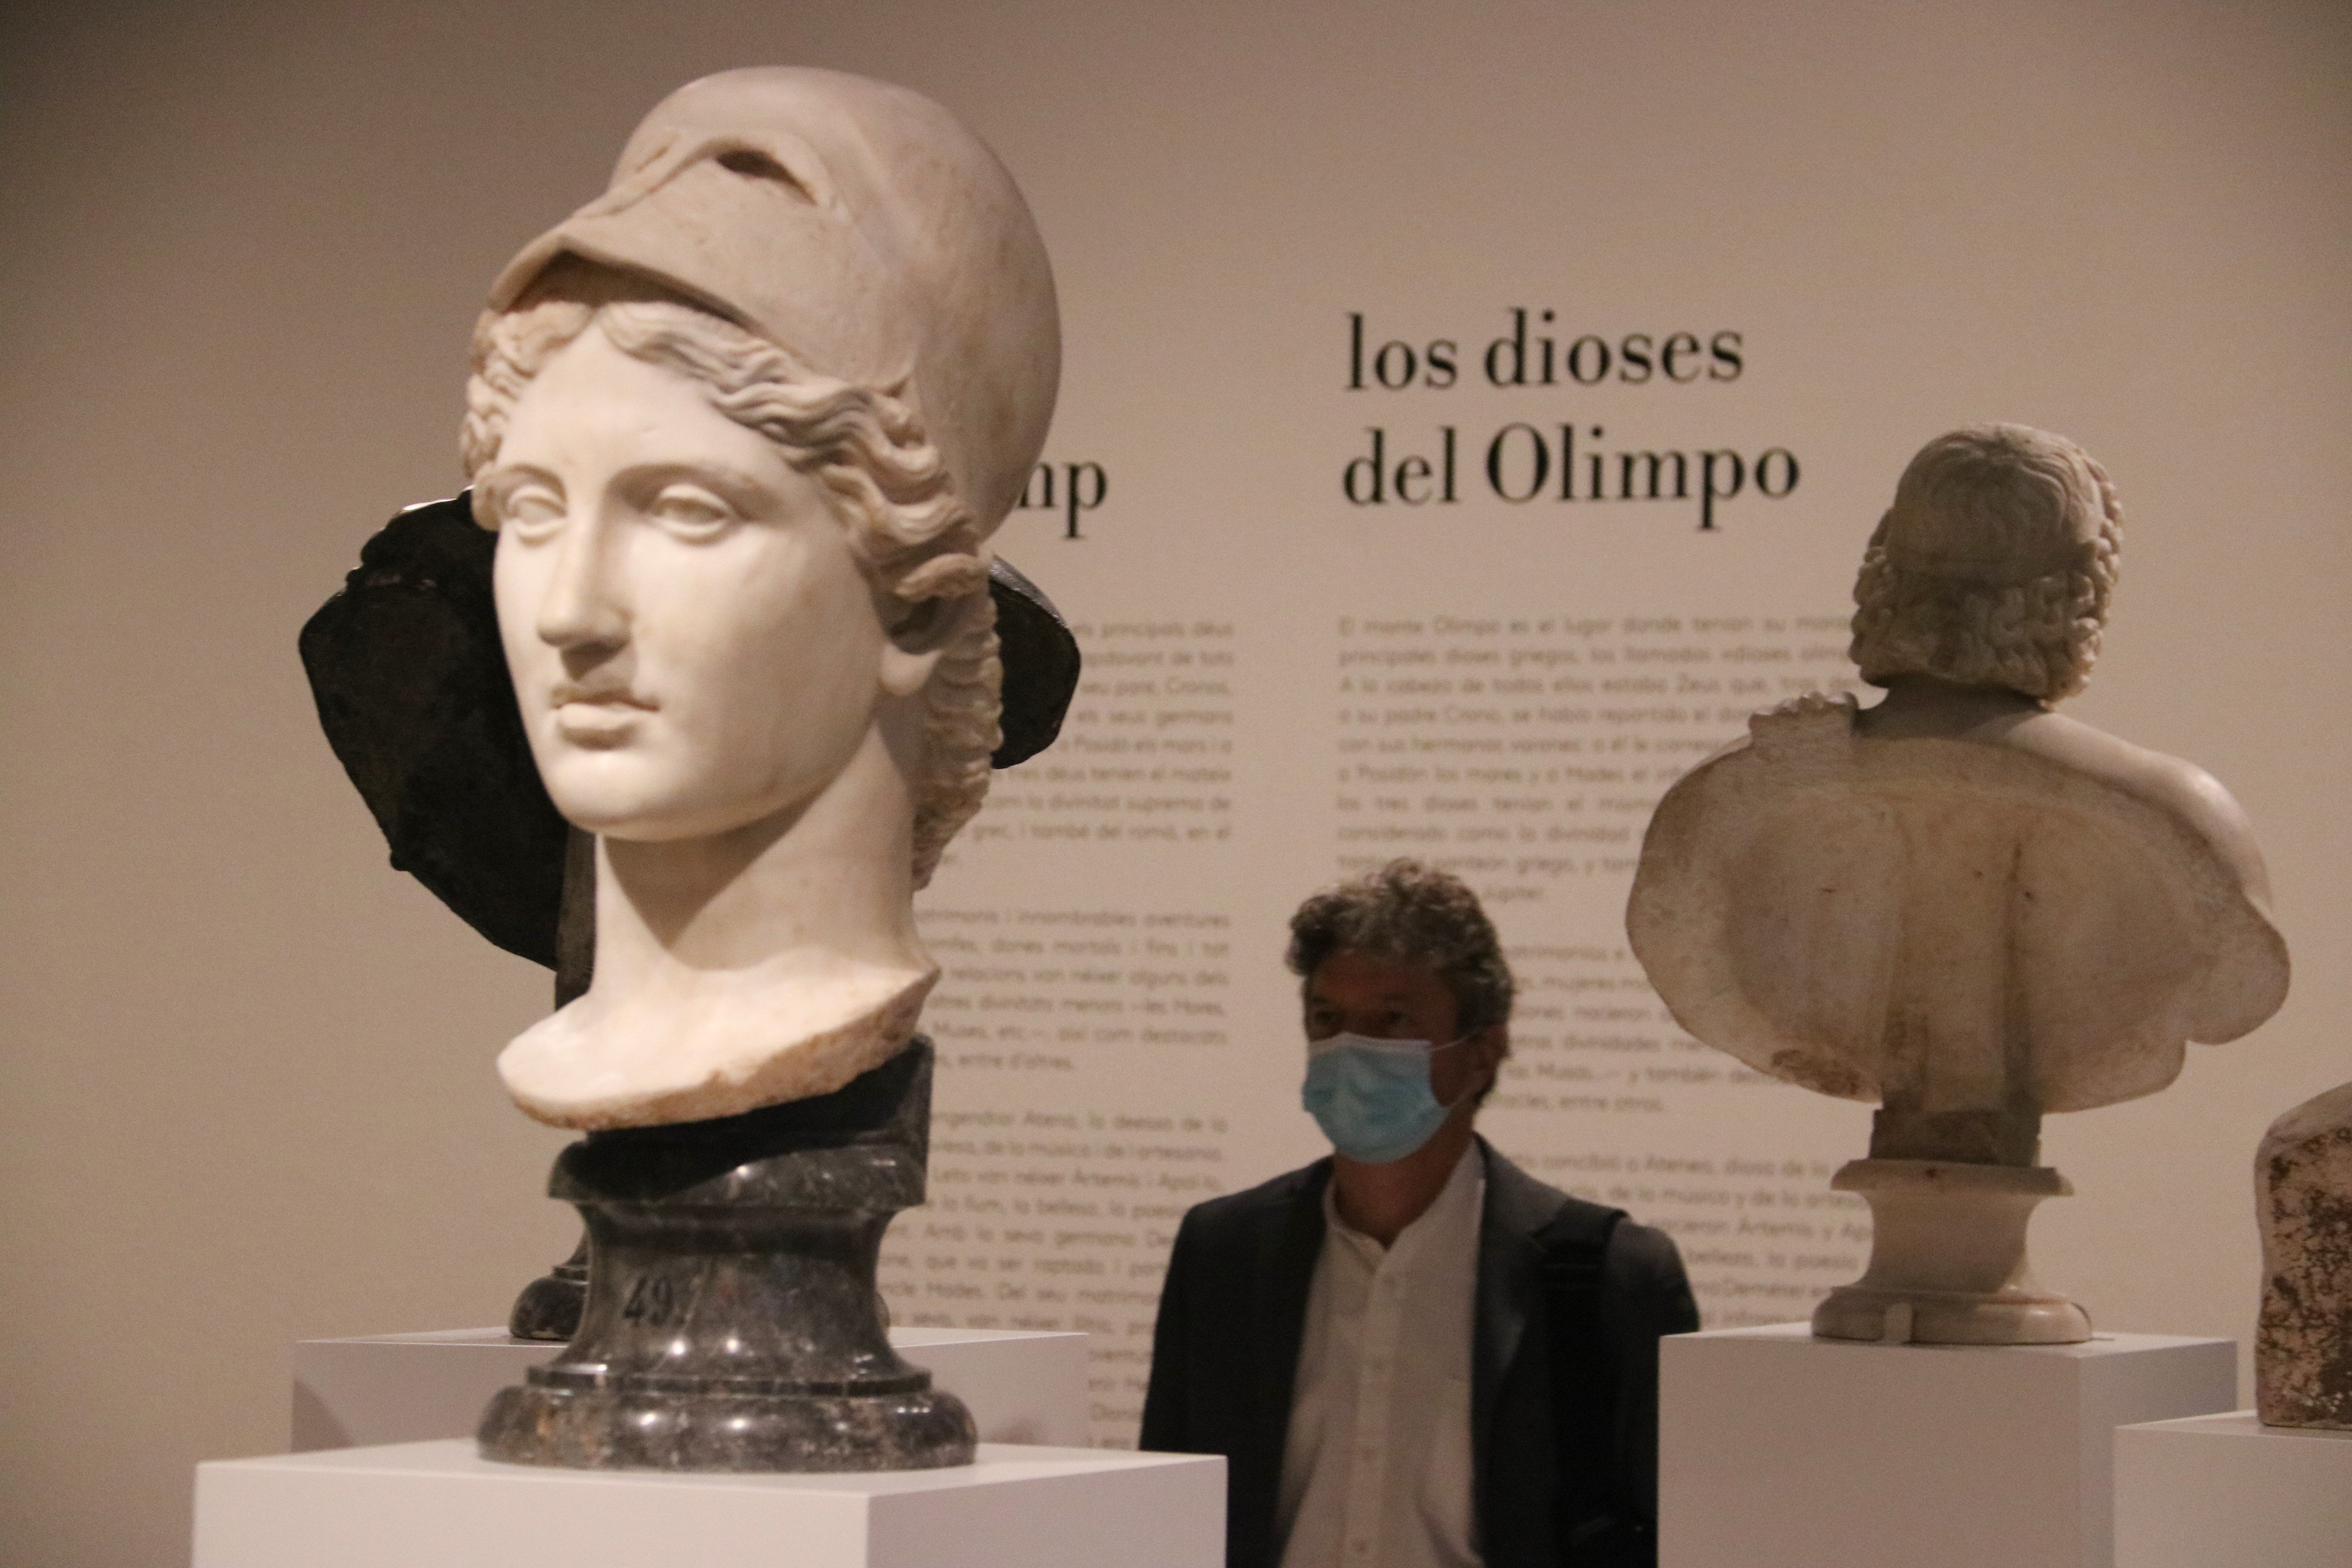 Statues on display at the CaixaForum for the 'Art and myth' exhibtion on Thursday 15, 2020 (by Pau Cortina)